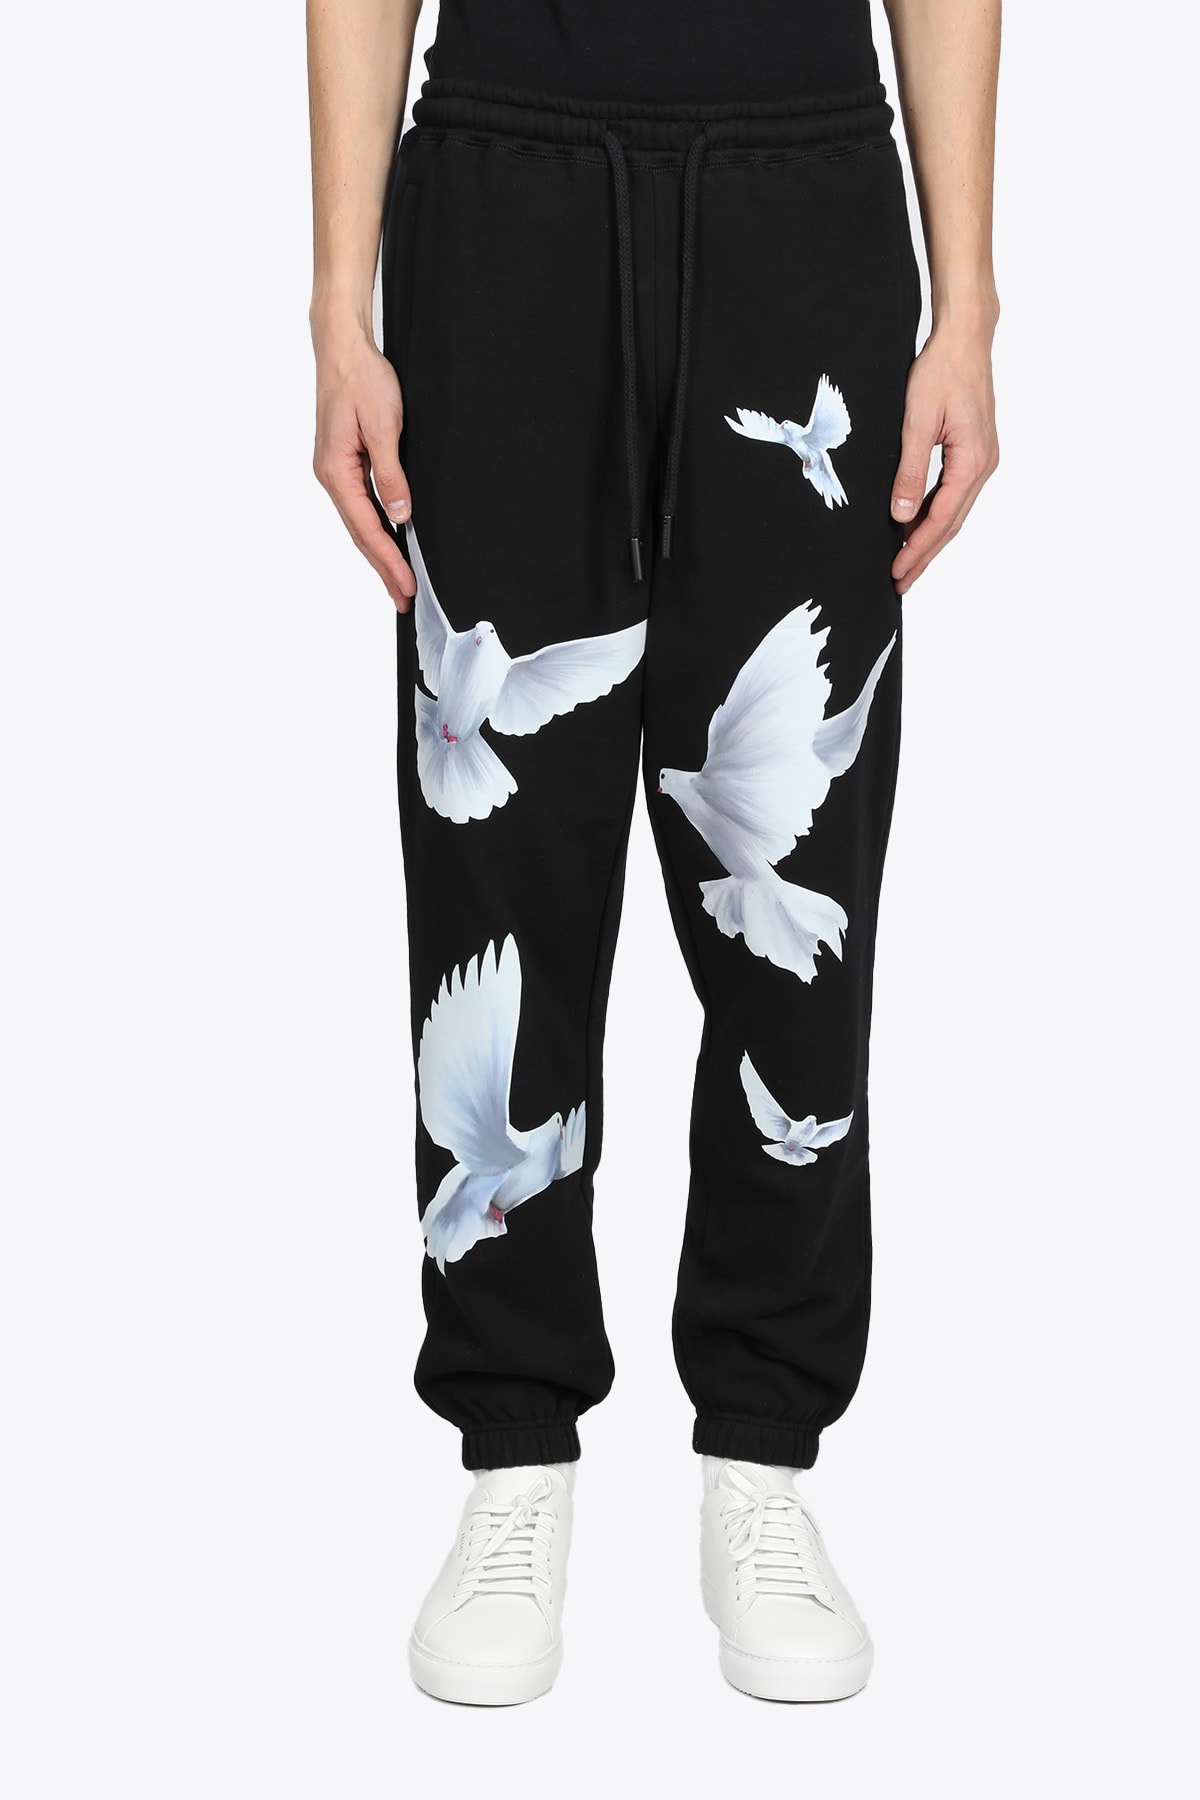 3.Paradis Flying Birds Lounge Pants Black cotton swetpant with flying birds print